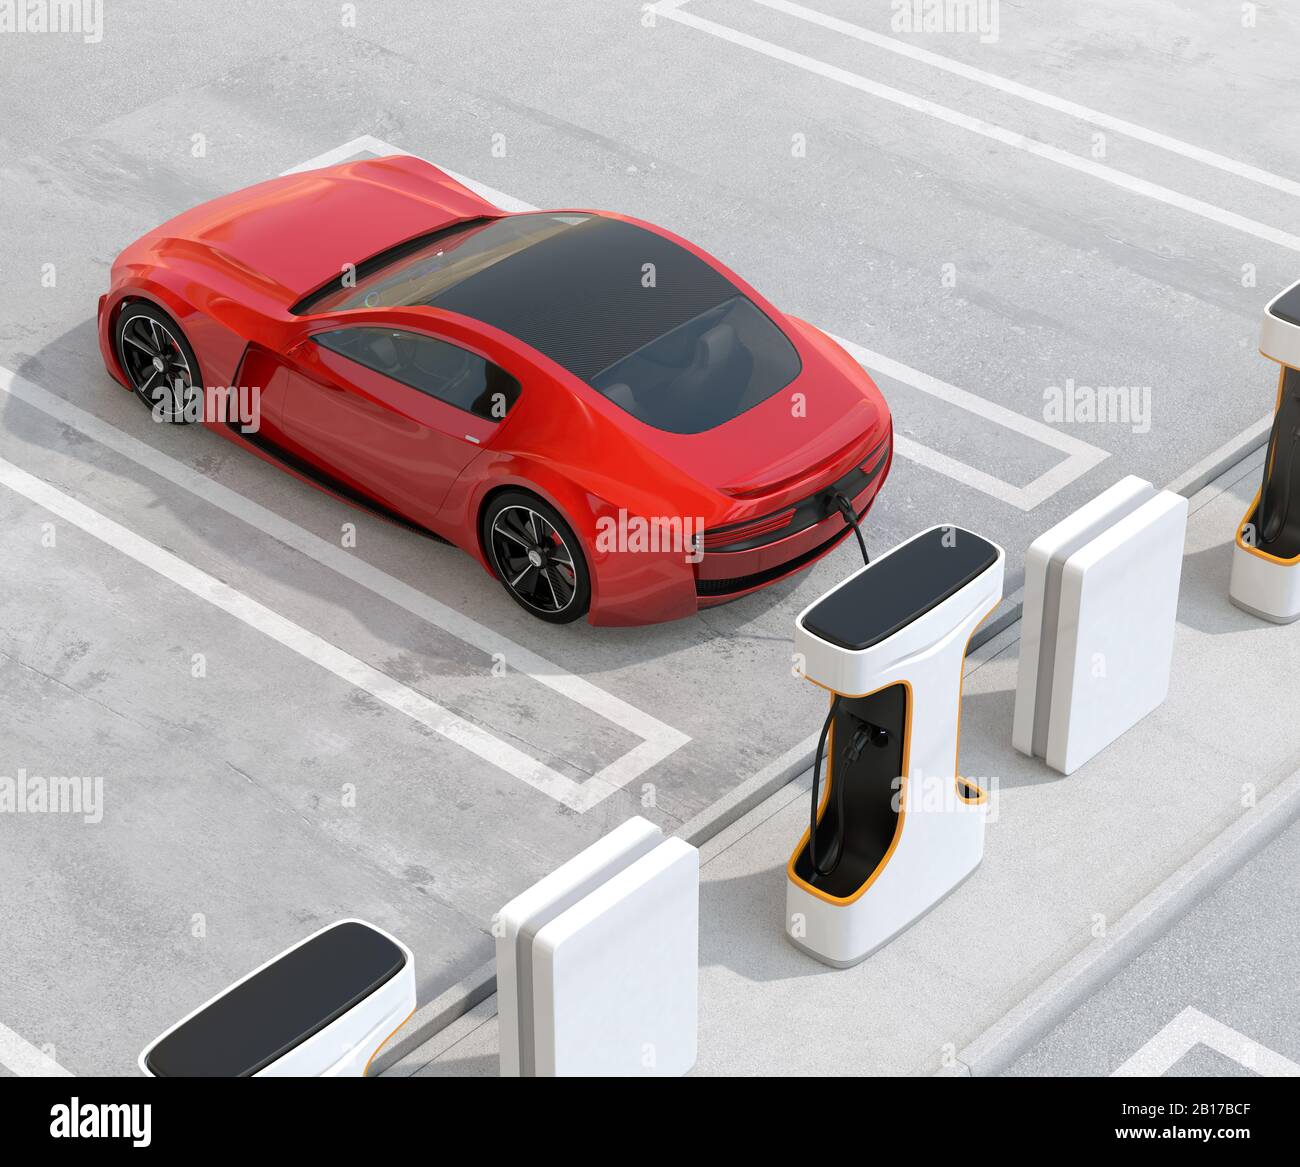 Side view of red electric sports car charging at home. Sustainable lifestyle concept. 3D rendering image. Stock Photo